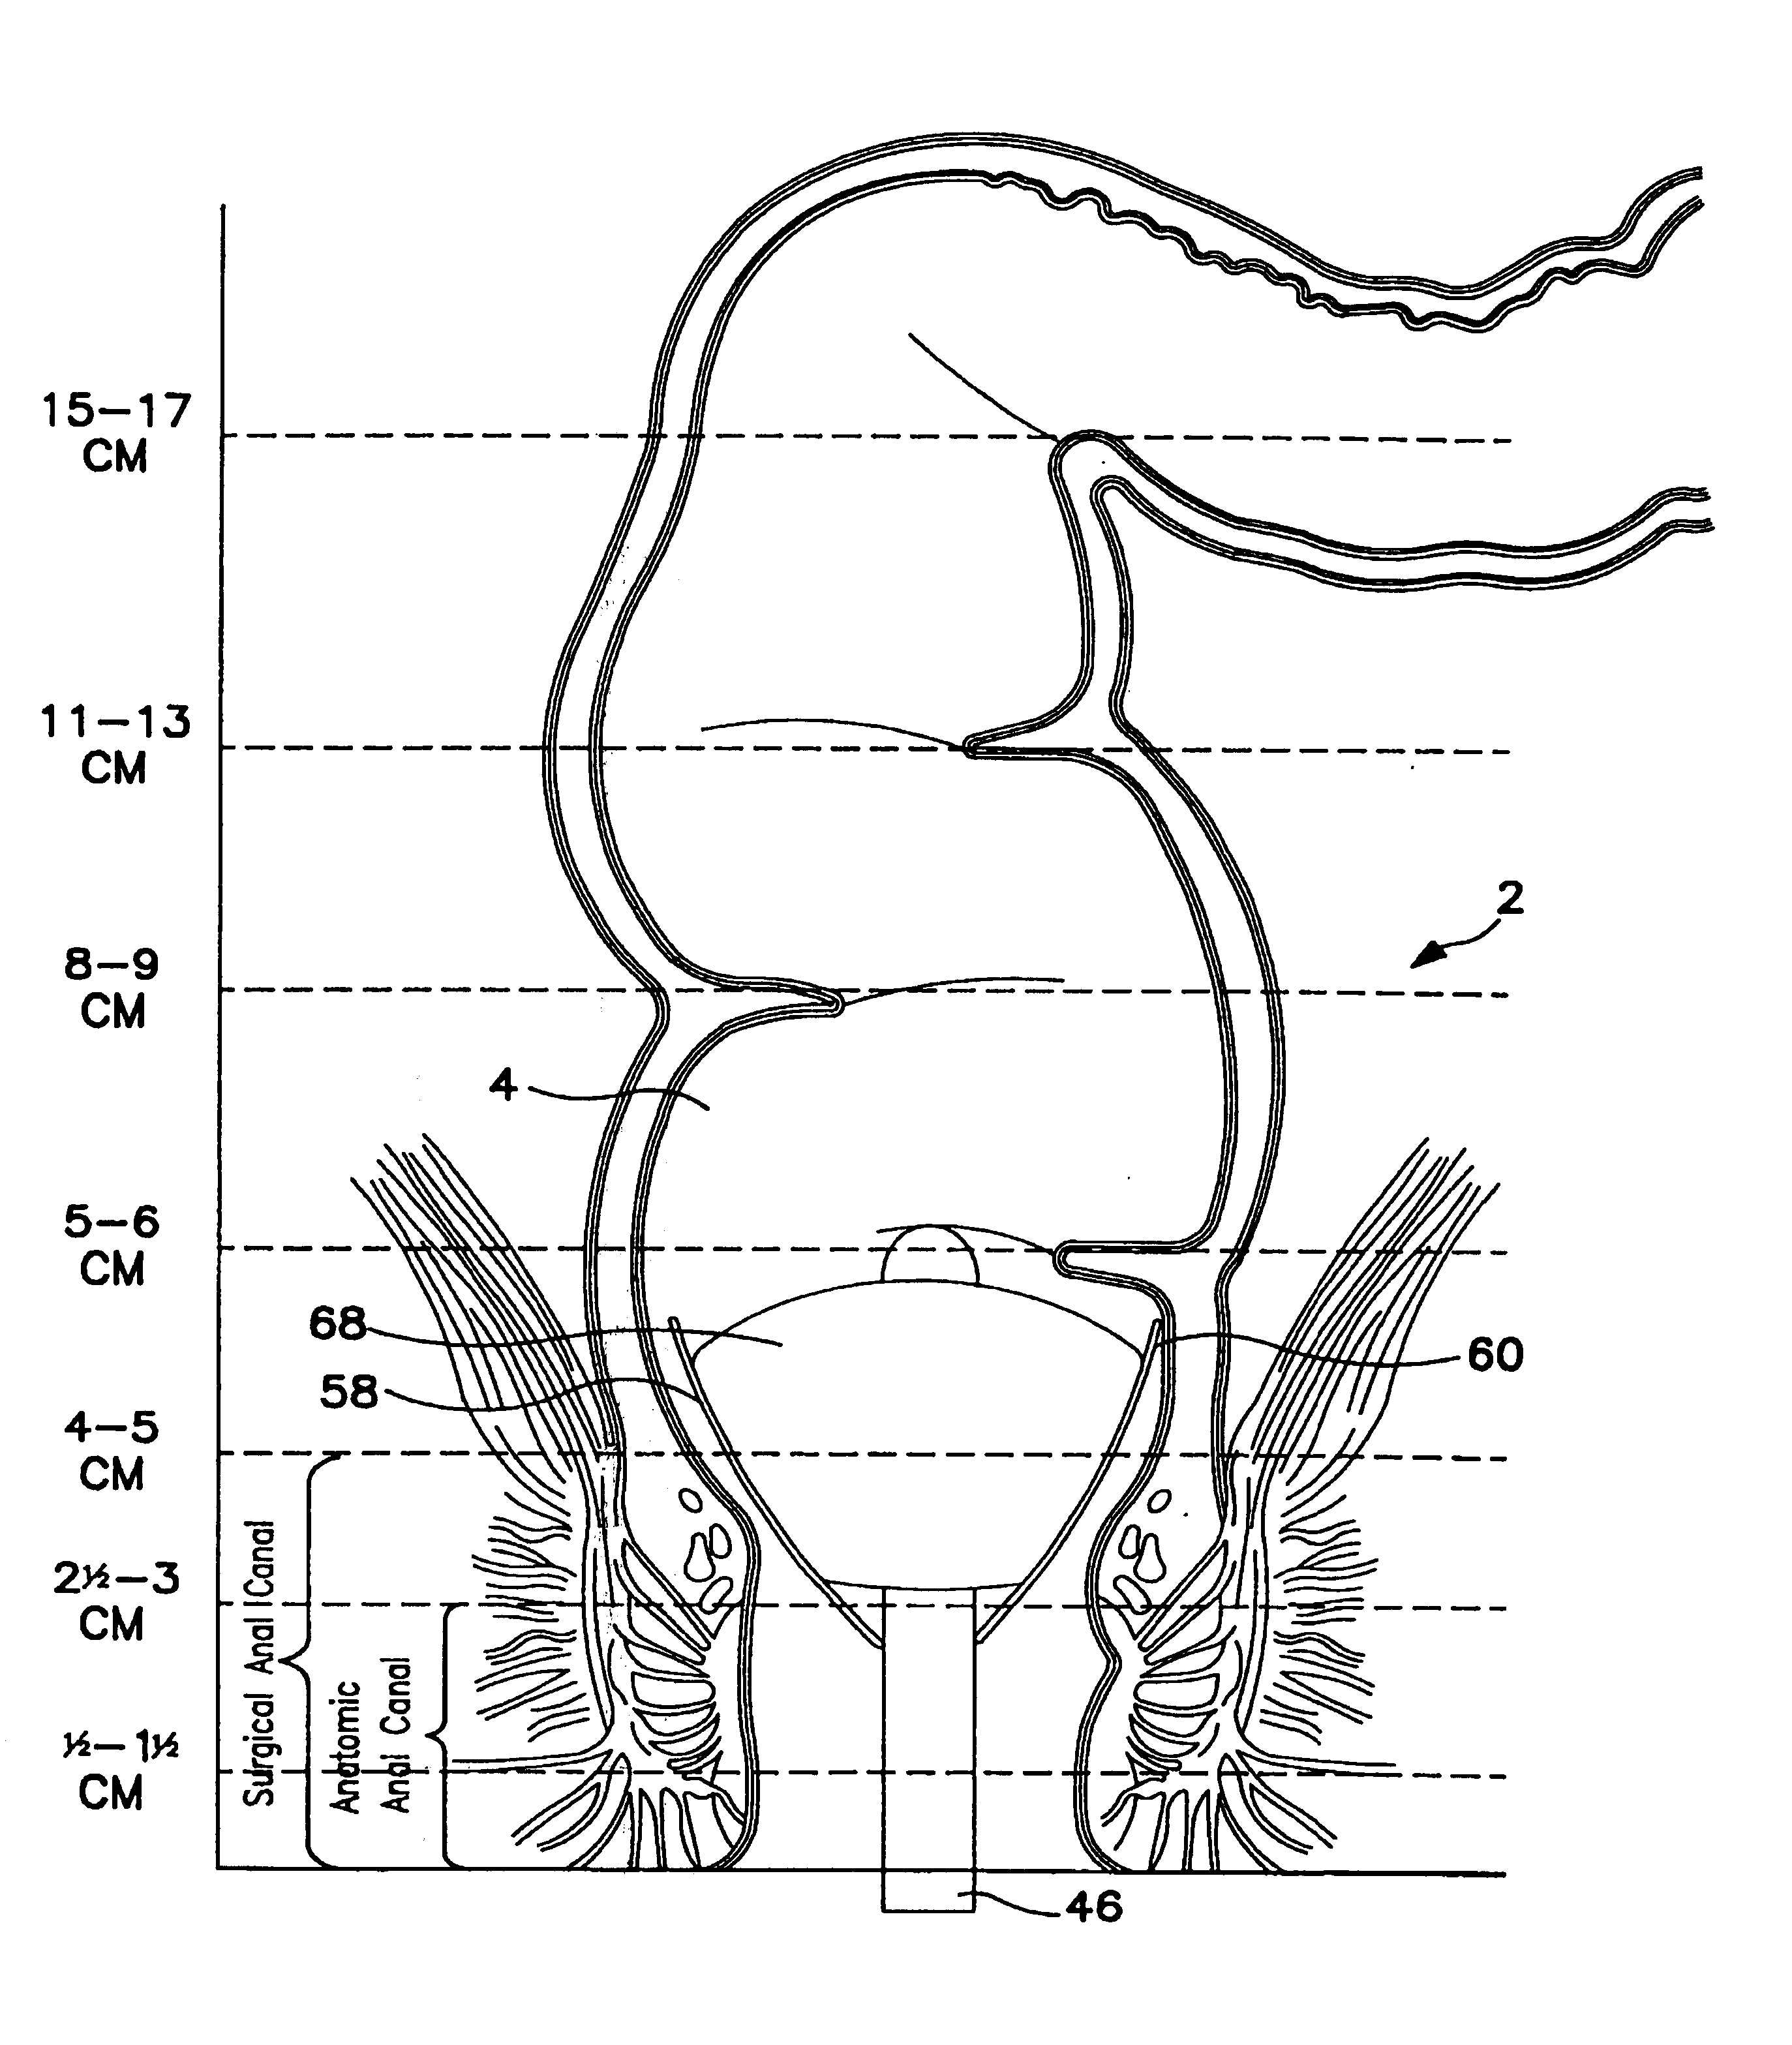 Method and apparatus for quantifying nerve and neural-muscular integrity related to pelvic organs or pelvic floor functions